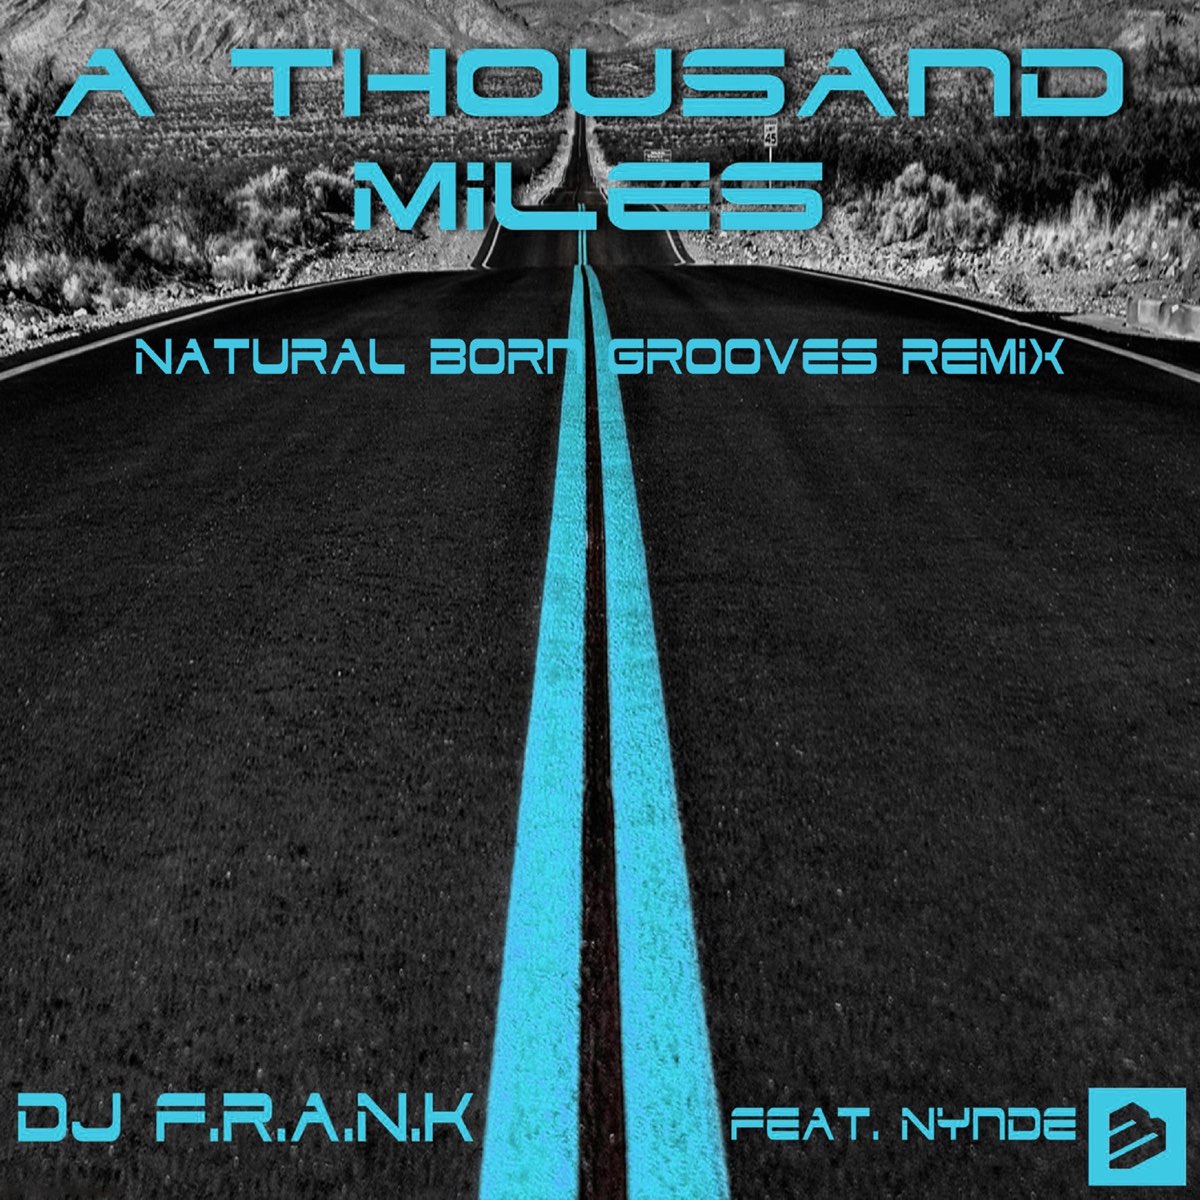 DJ F.R.A.N.K. Thoba & Kate Miles your Love. A Thousand Miles ft Terry. Bea Groves.